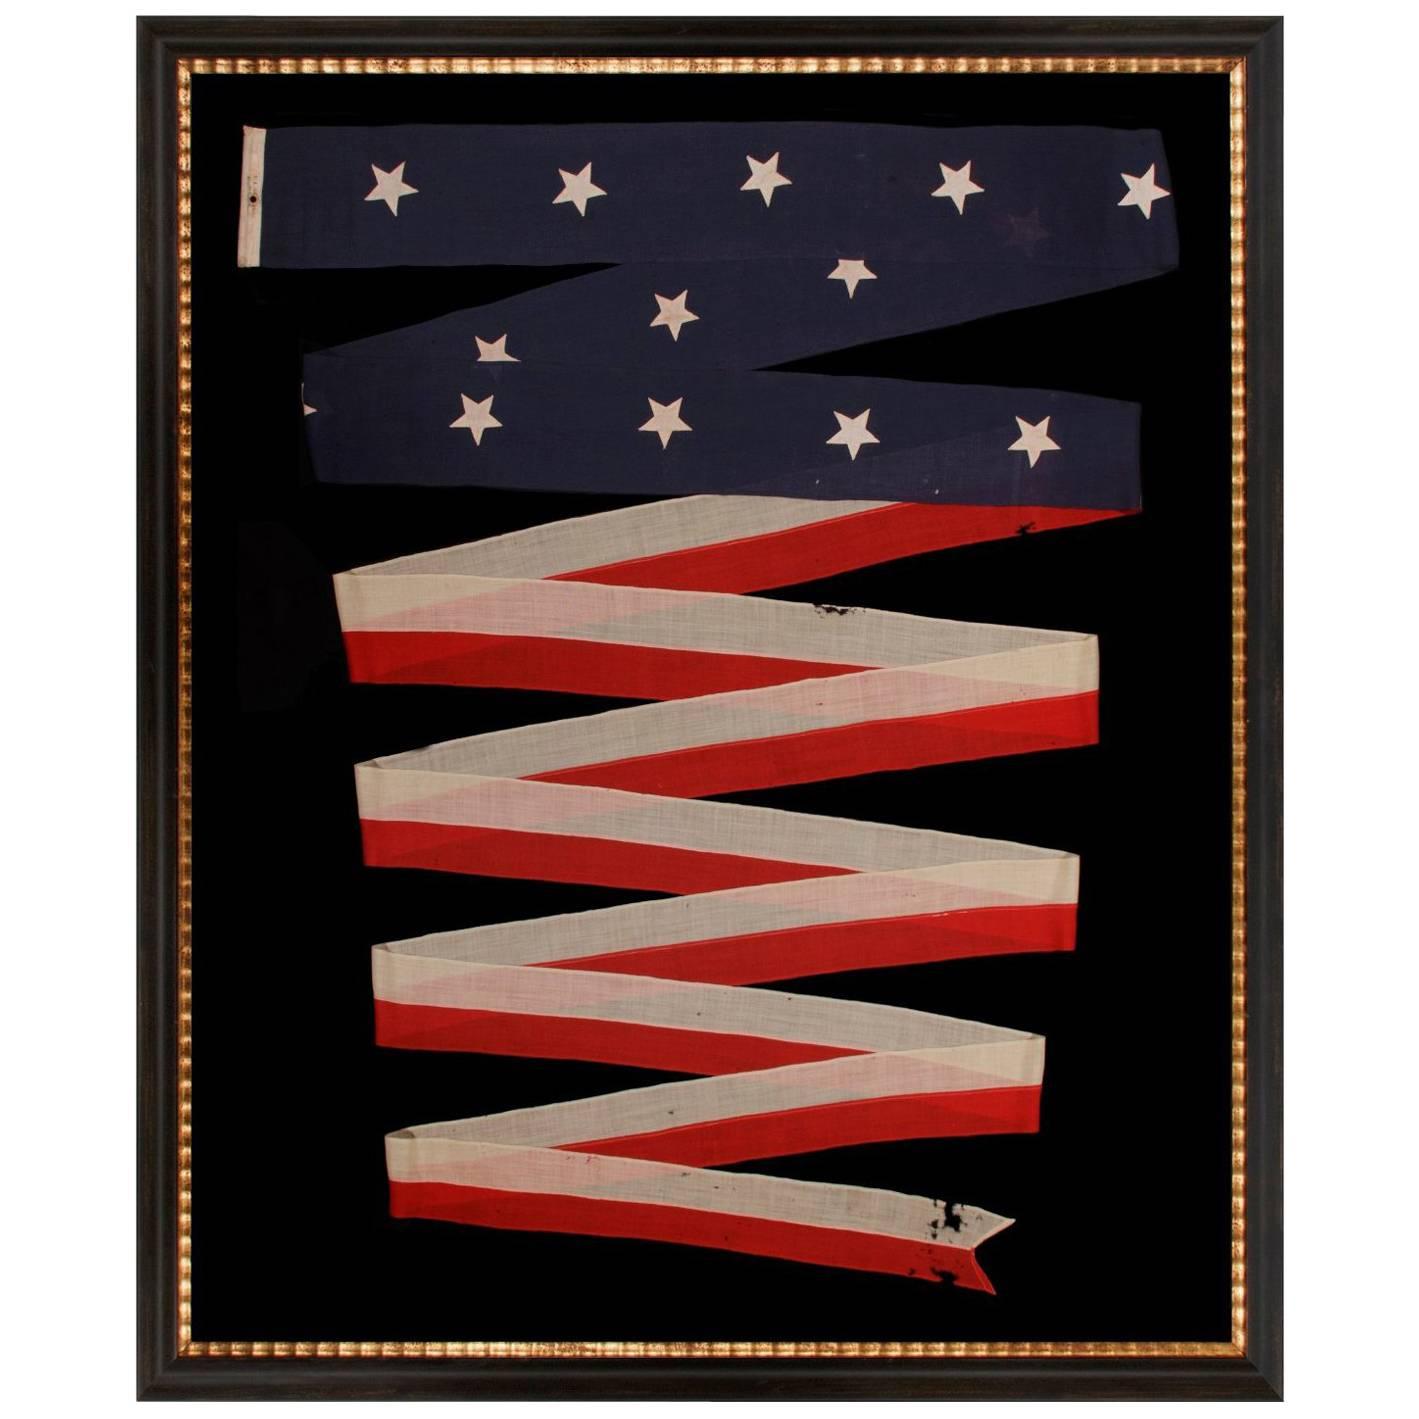 U.S Navy Commission Homeward Bound Pennant with 14 Stars, Made by El Rowe & Sons